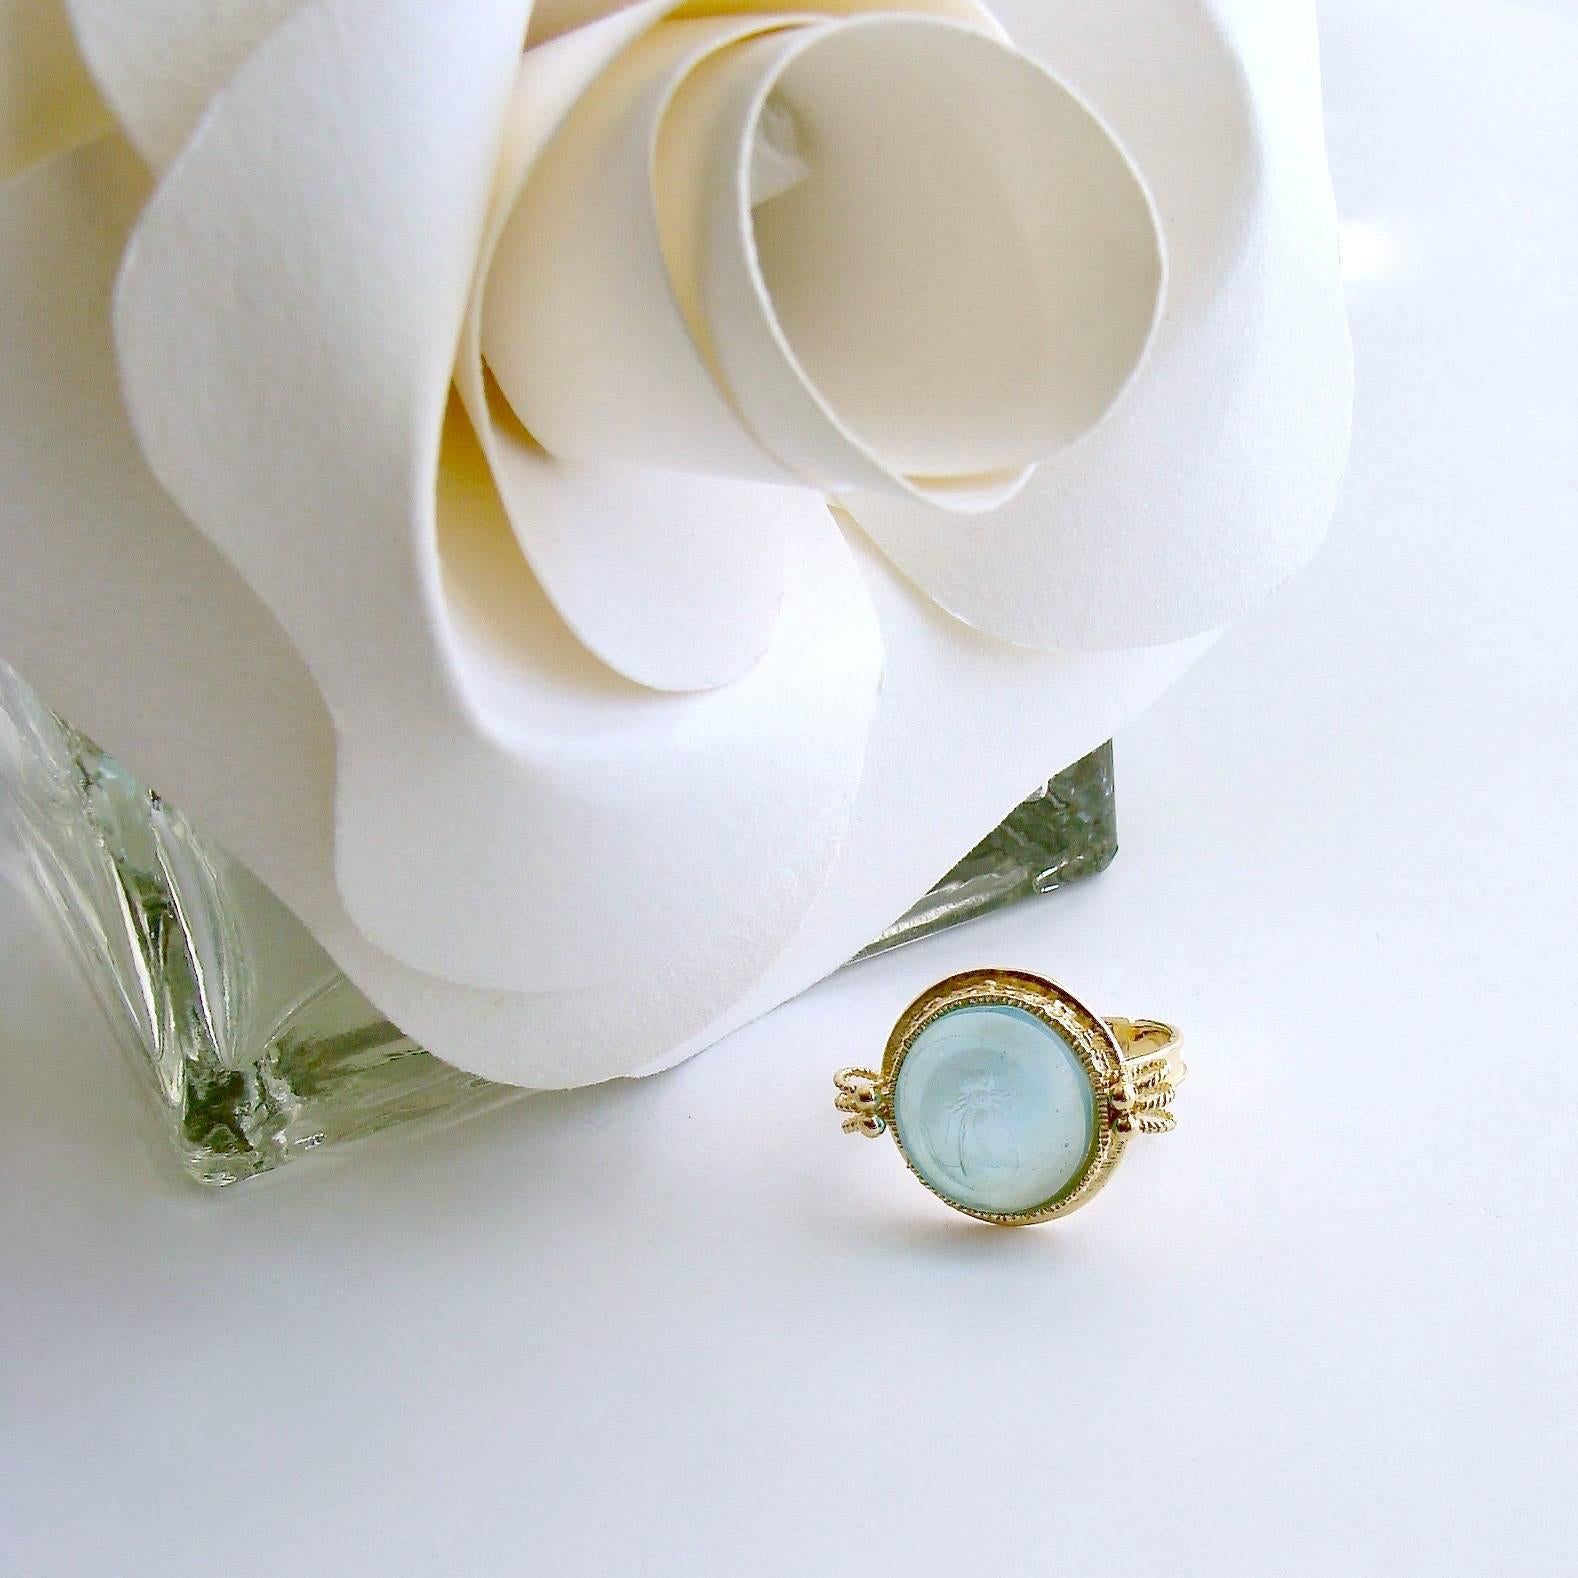 Peu d’Abelle Aqua Ring.

A dainty gorgeous soft aqua Venetian glass intaglio of a Napoleonic bee is the focal point of the charming ring.  This classic work of art has been backed with mother-of-pearl and is set in timeless neoclassical gold vermeil